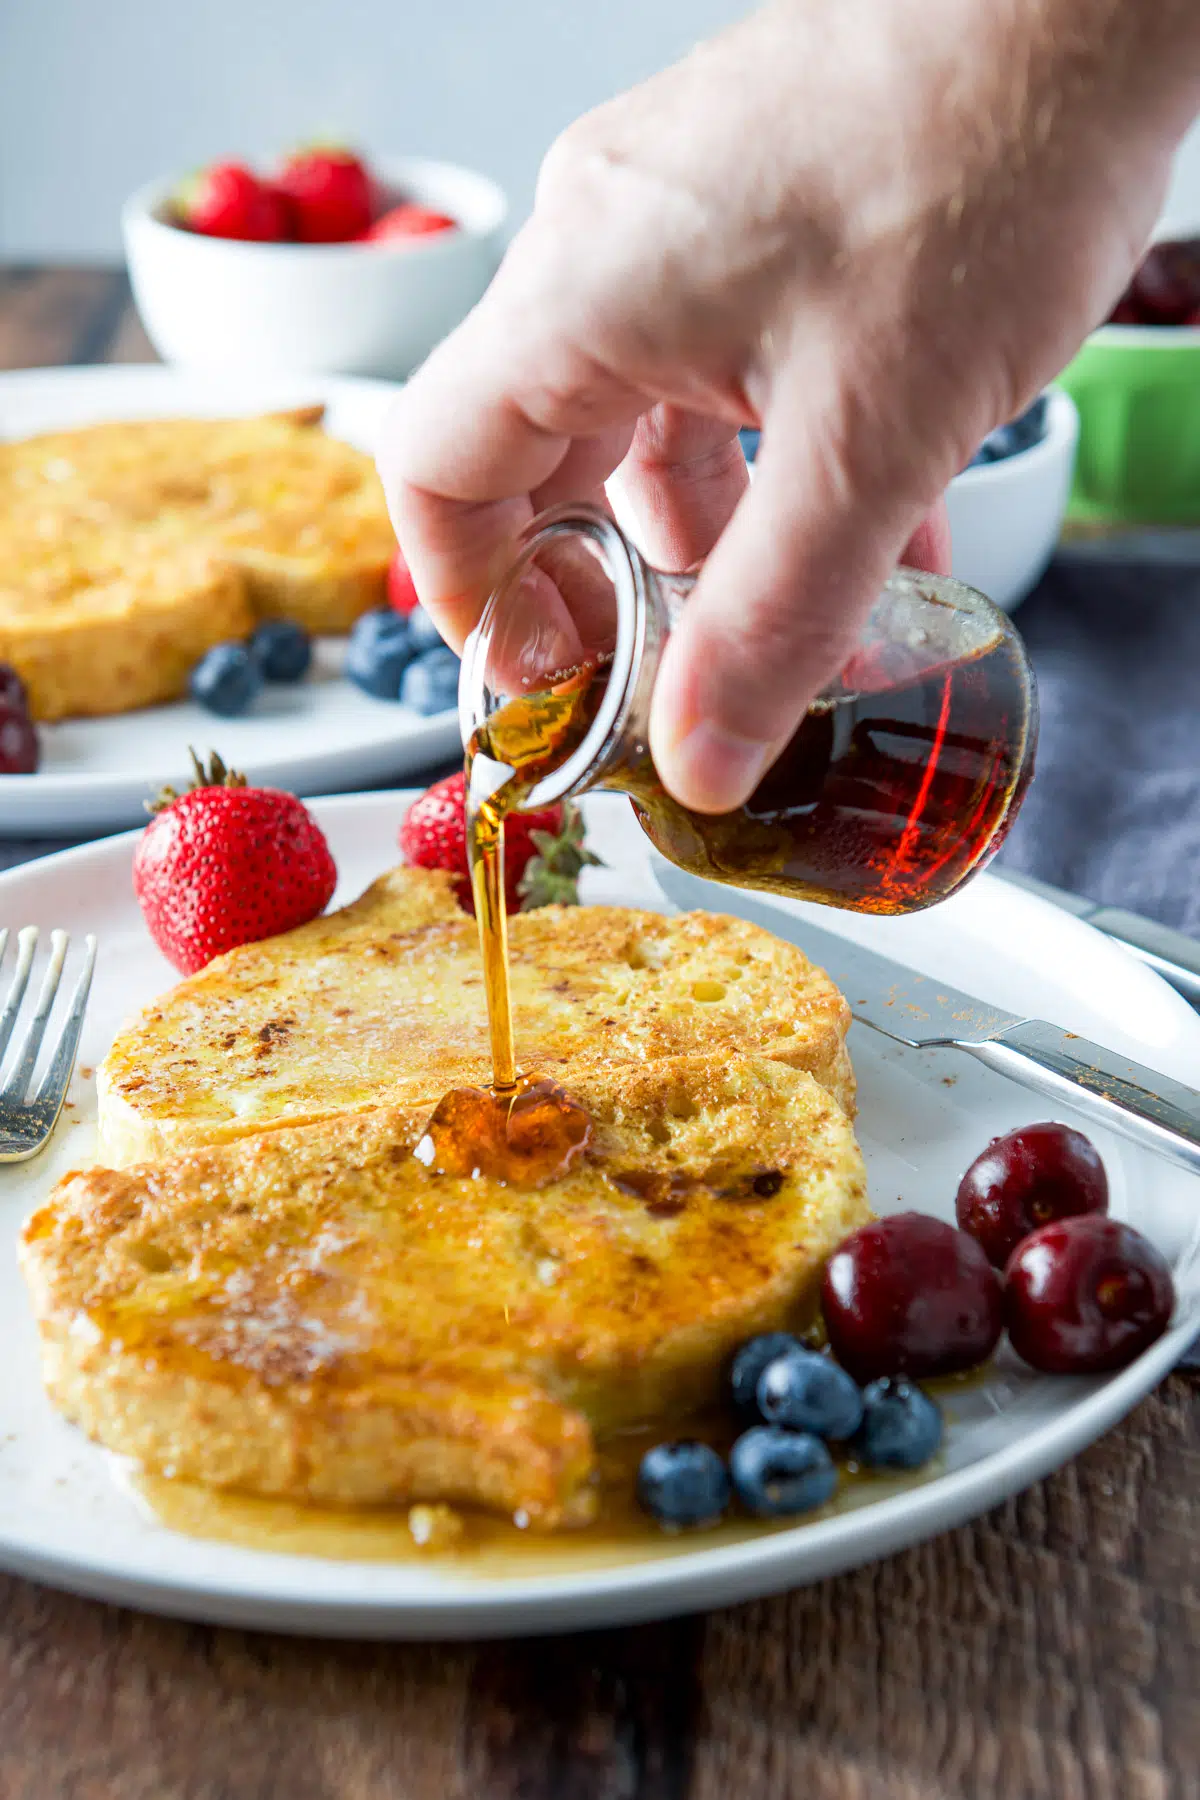 A male hand pouring maple syrup on the buttered French toast